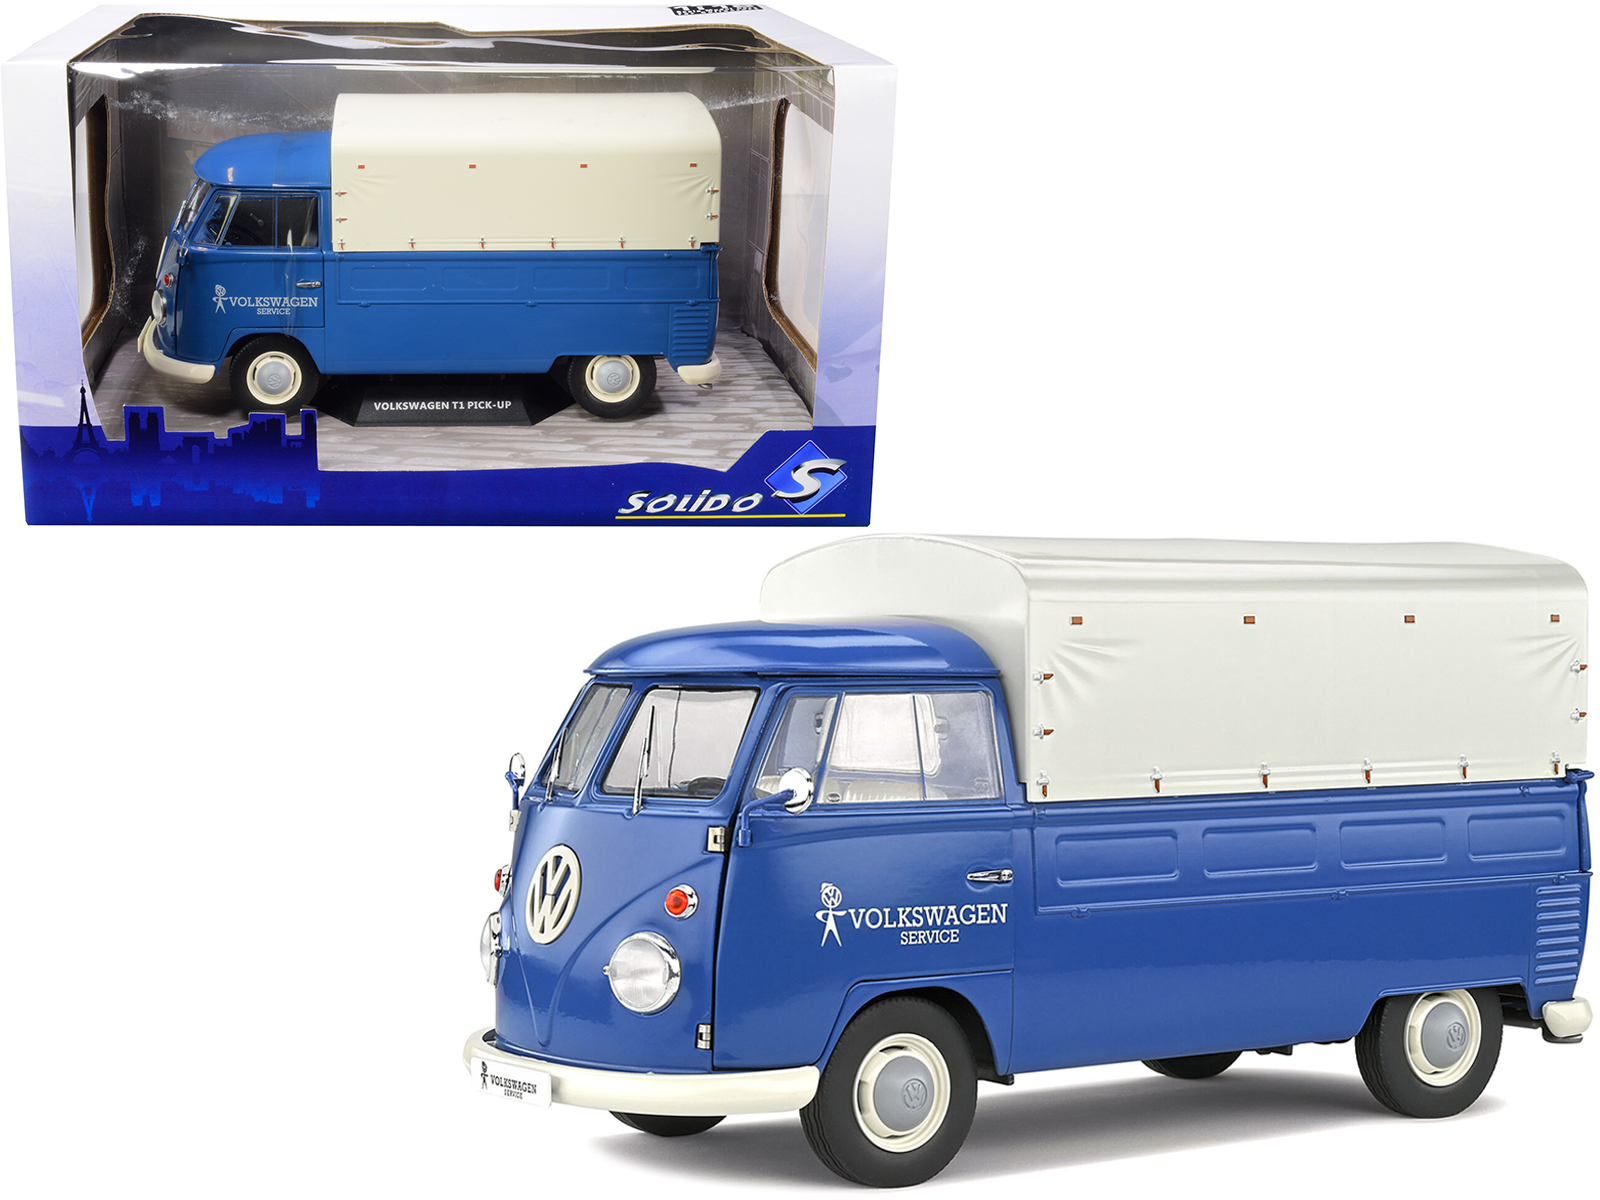 Solido Volkswagen T1 Pickup Truck Blue with Canopy "Volkswagen Service" 1/18 Diecast Model Car by Solido